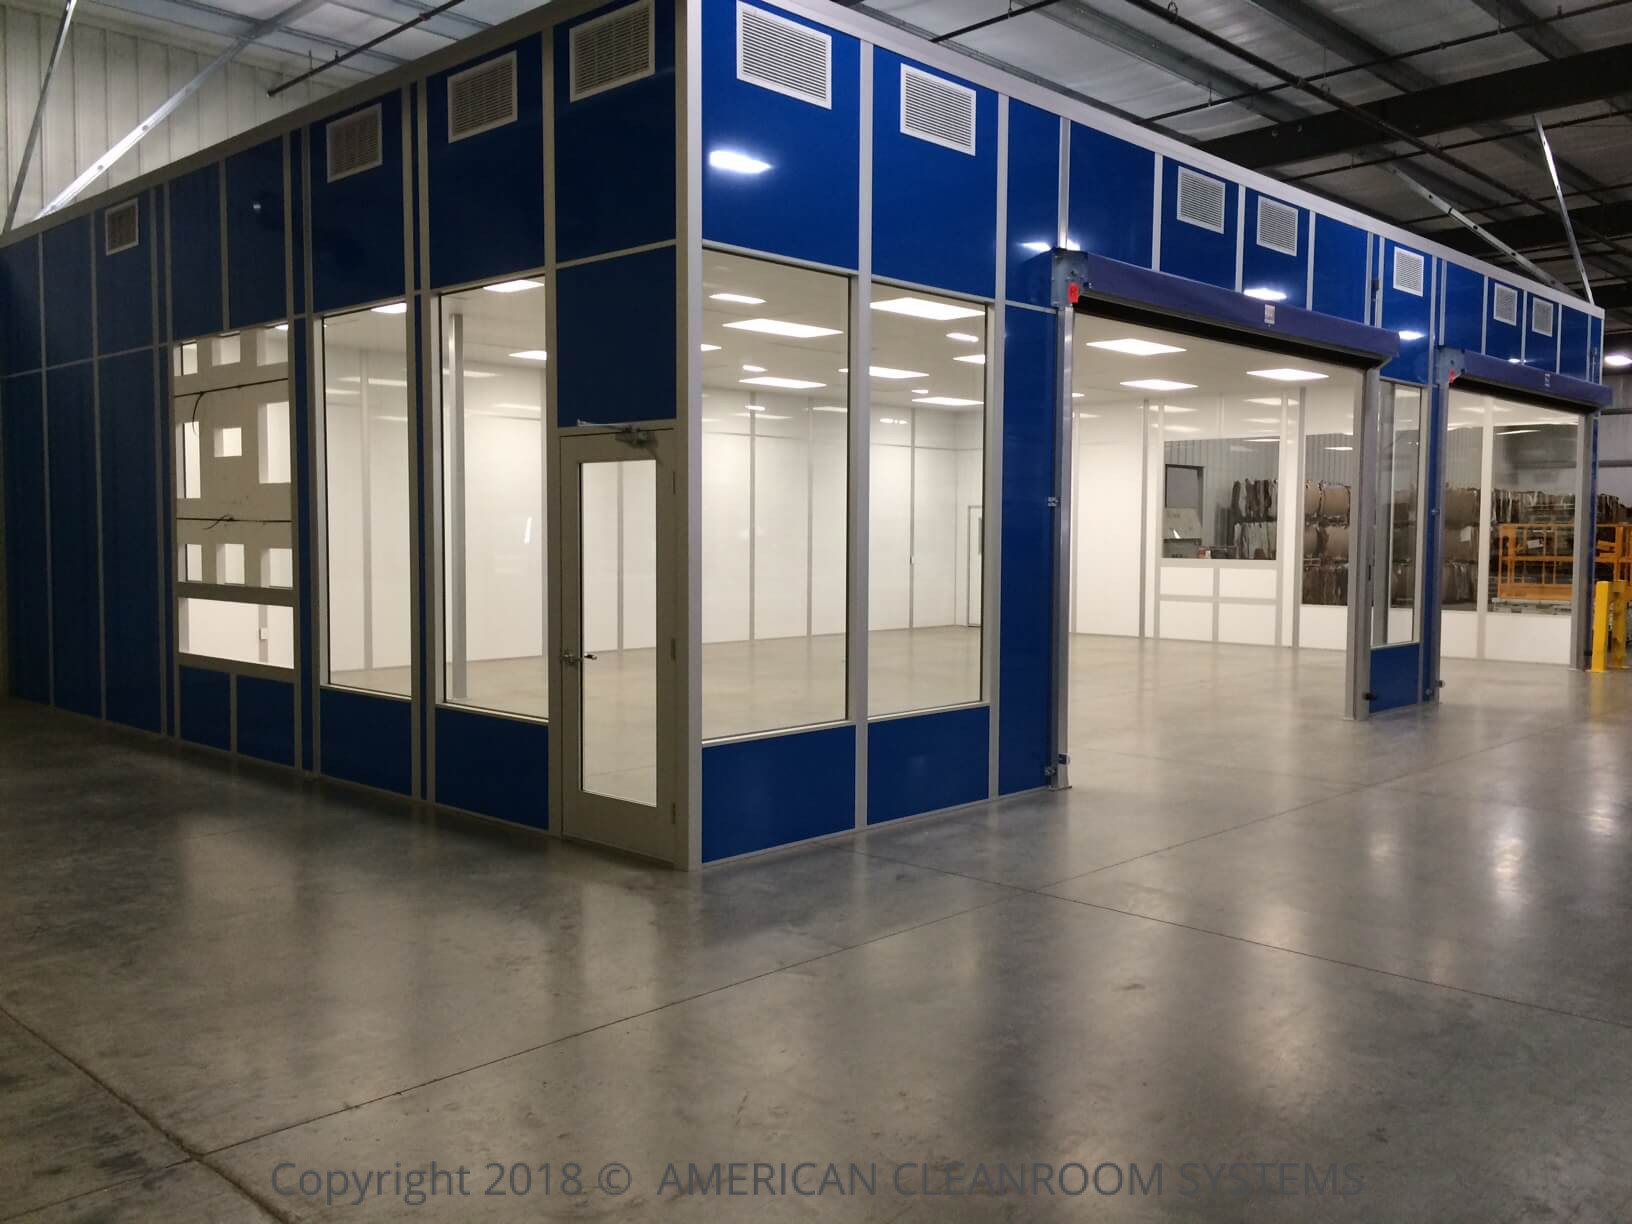 1,536 Square Foot, Class 100,000, ISO8 Modular Cleanroom